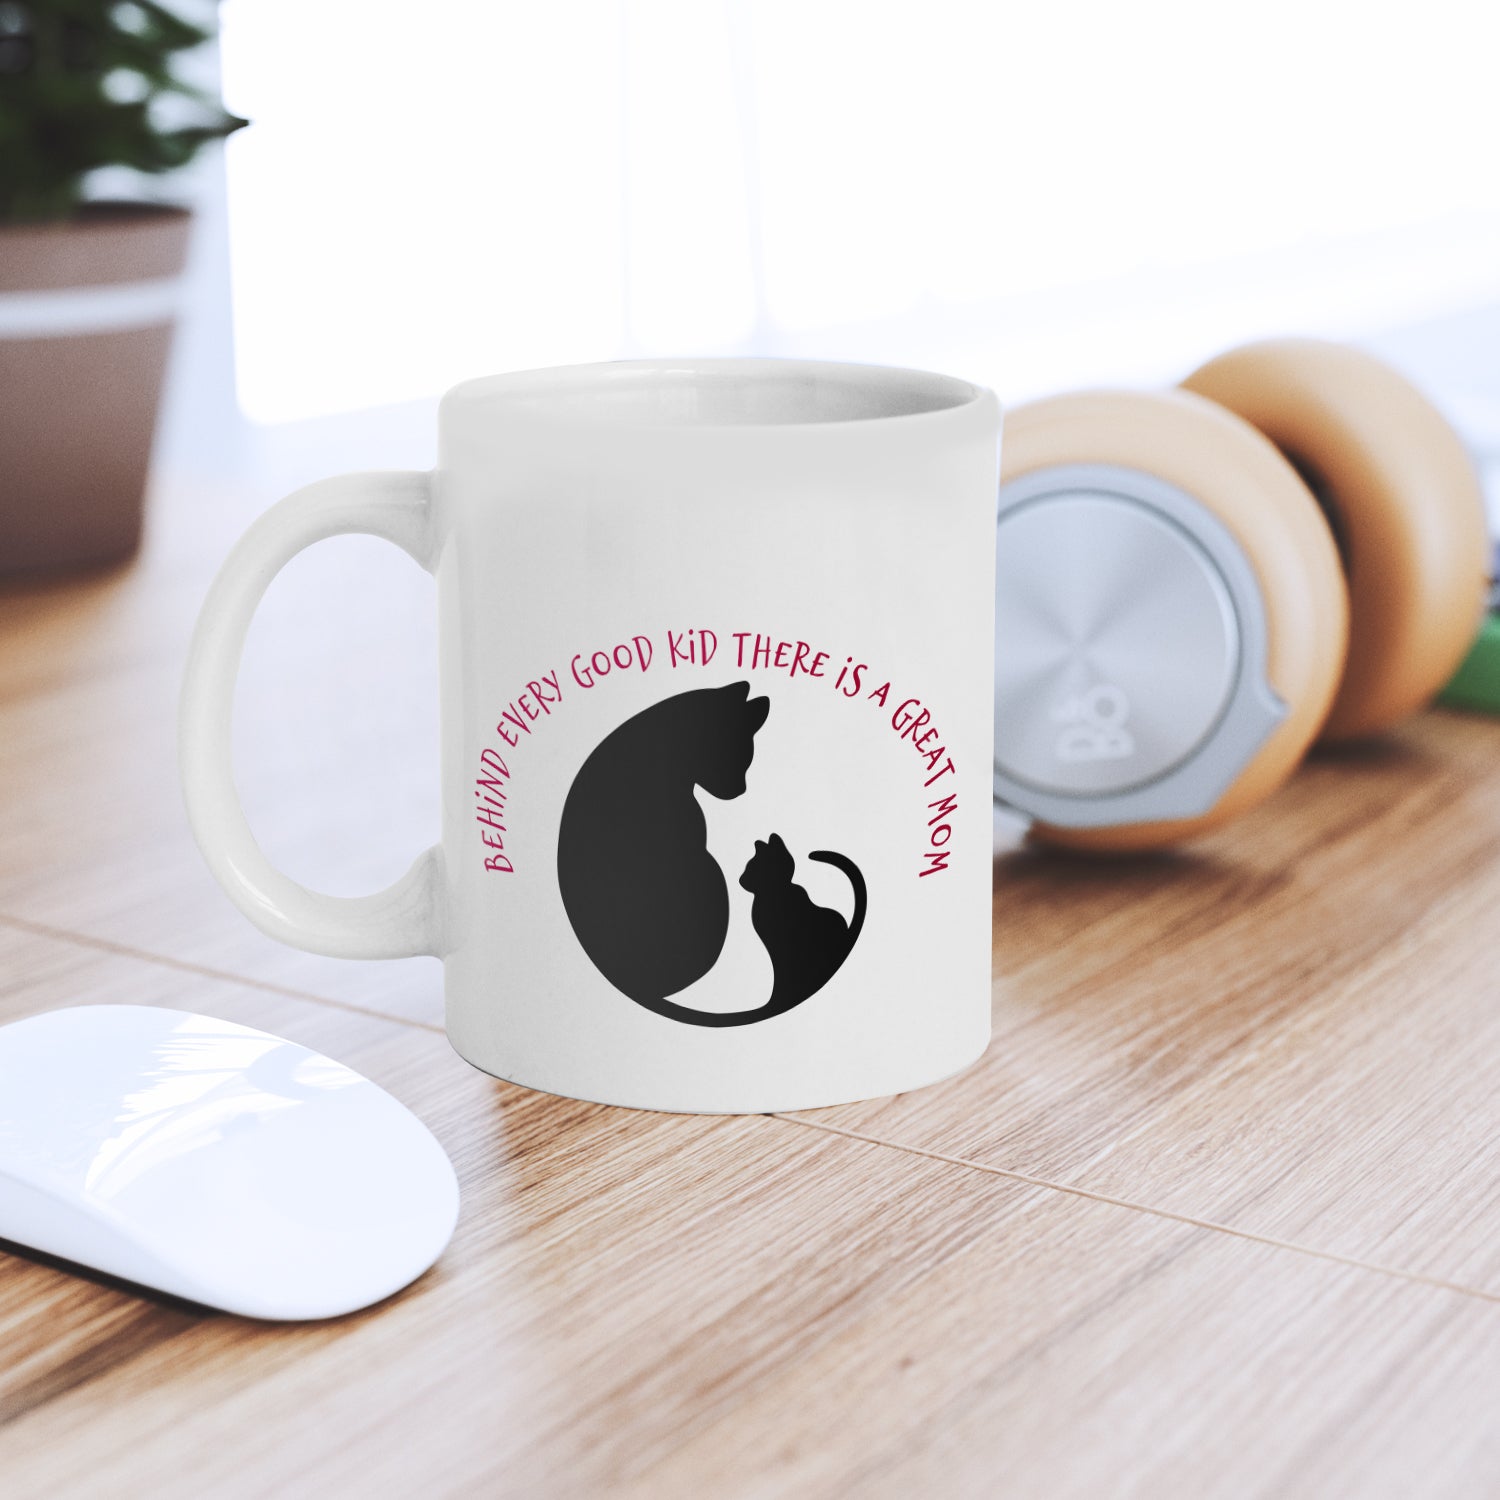 "Behind every good kid there is a great mom" Mother's Day theme Ceramic Coffee Mugs